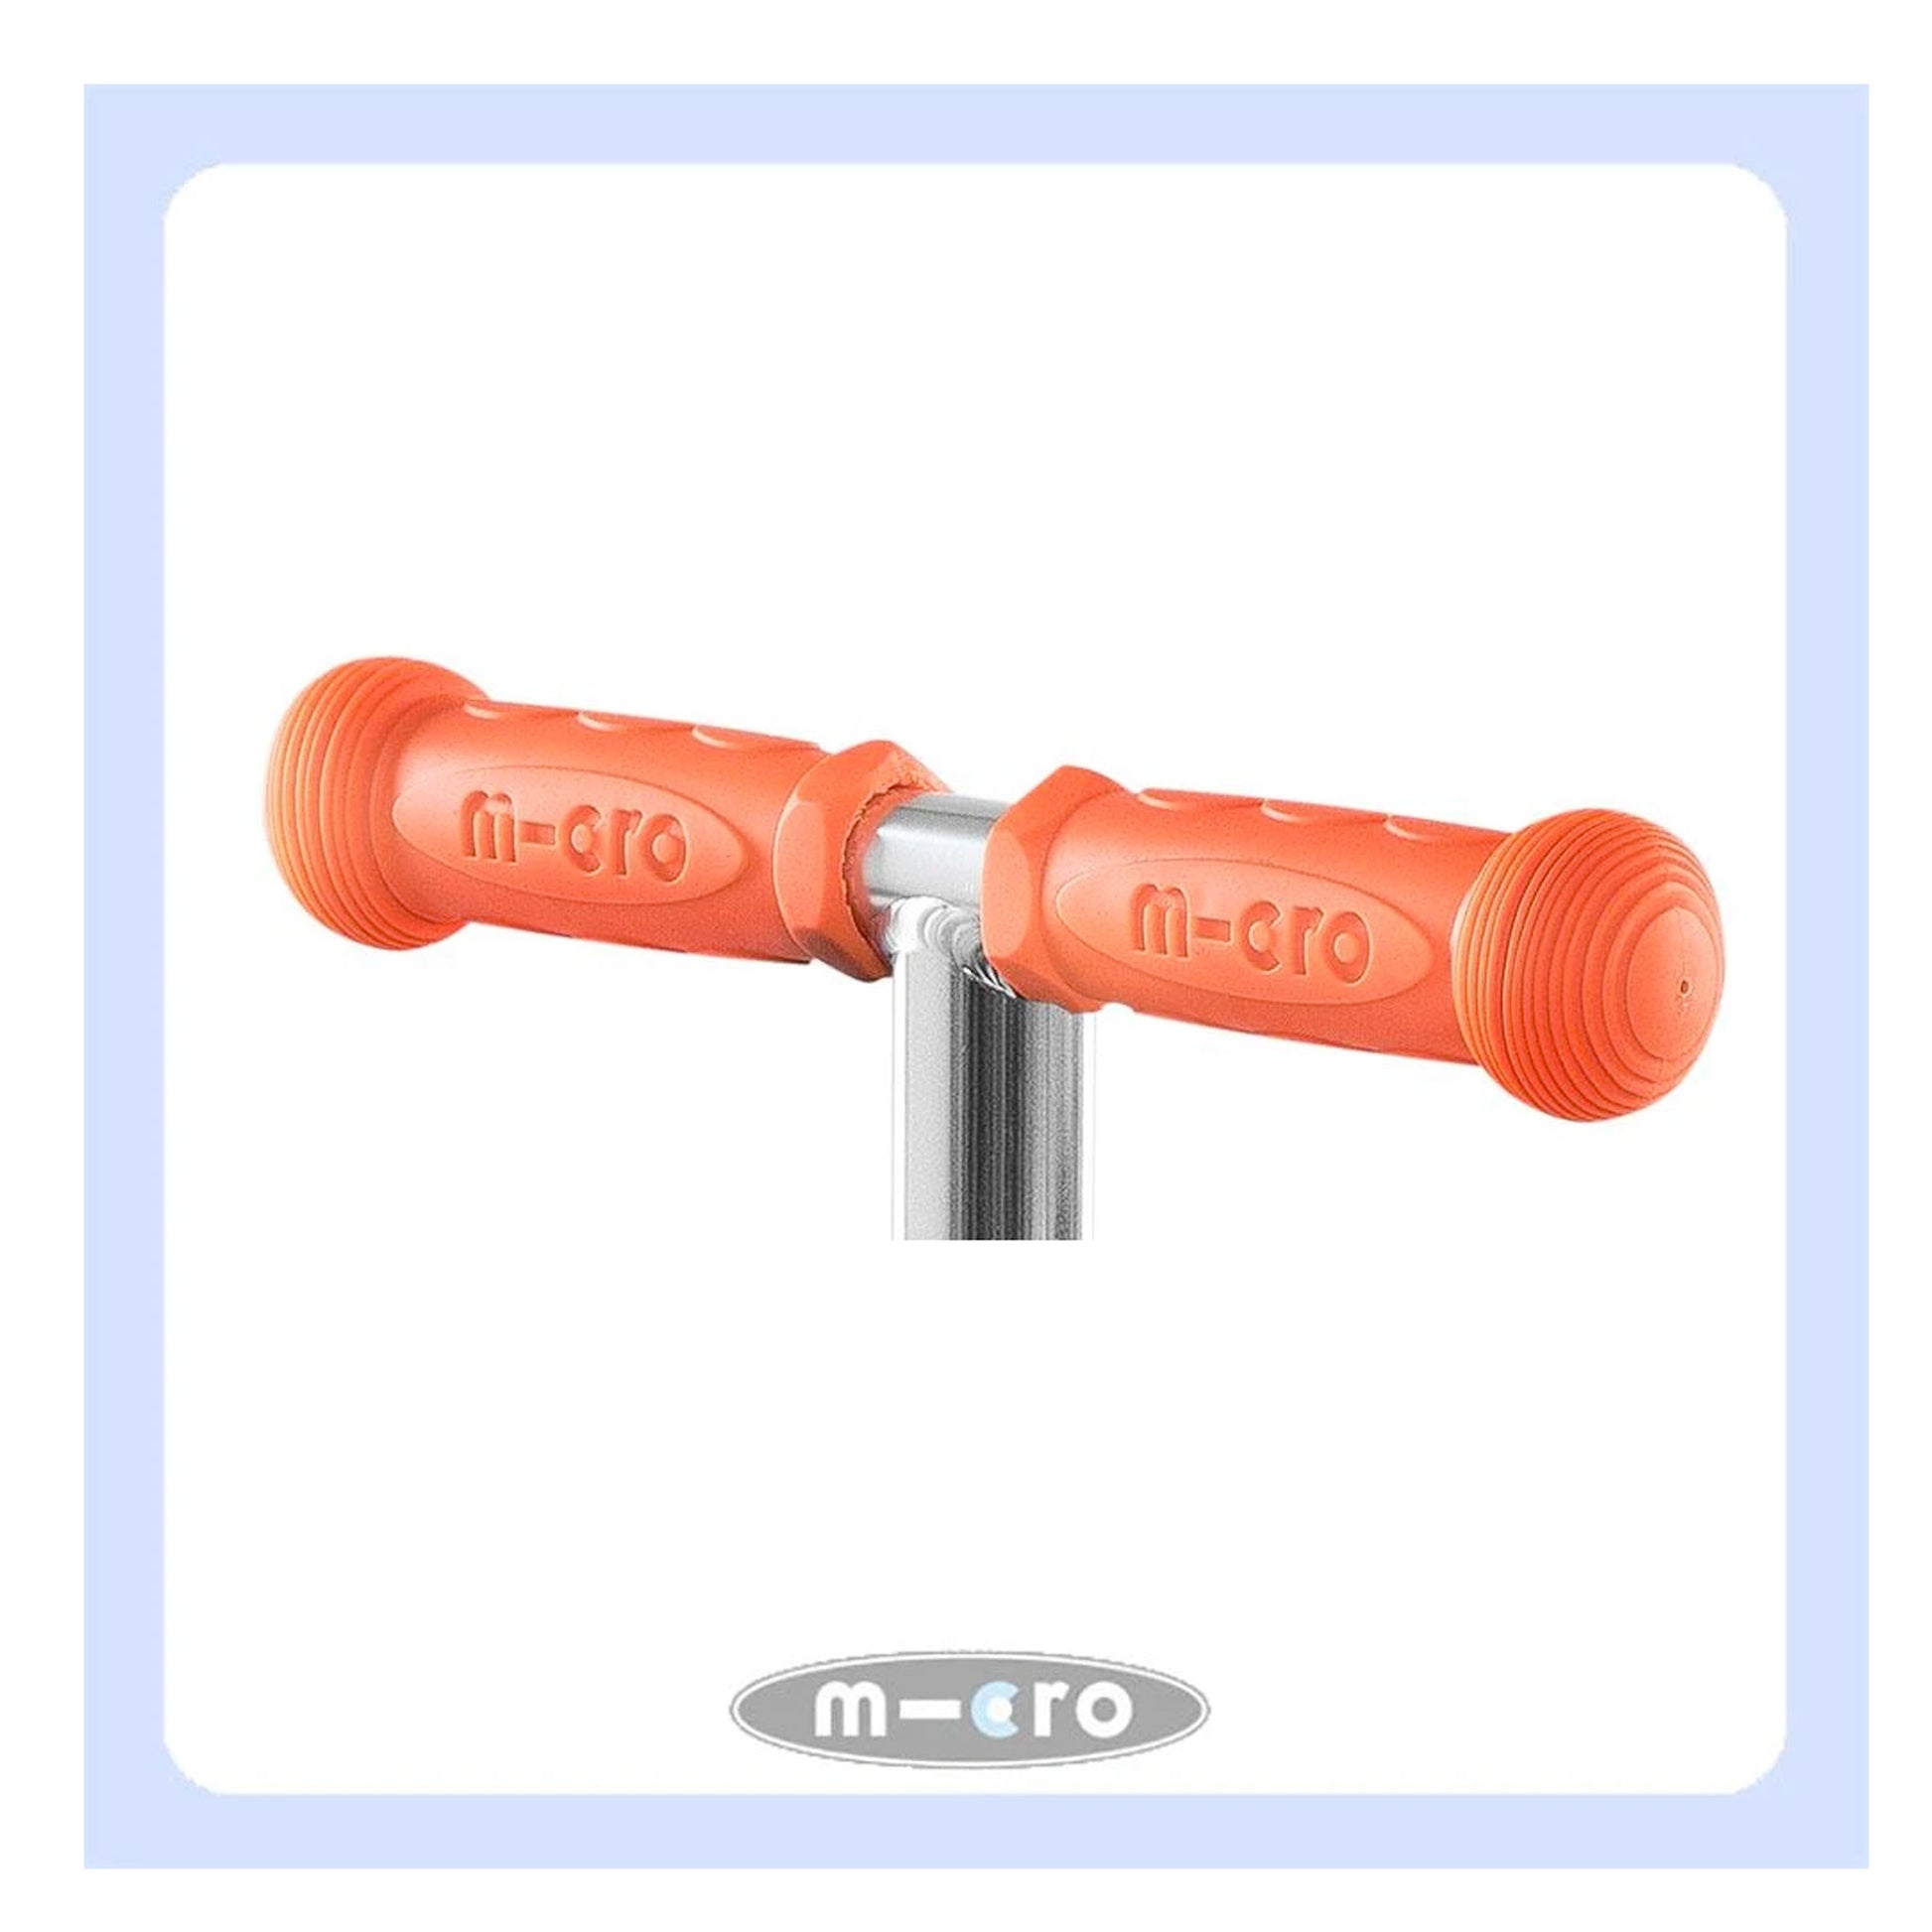 Micro Scooter Replacement Rubber Grips - Orange buy online at Woolys Wheels Sydney